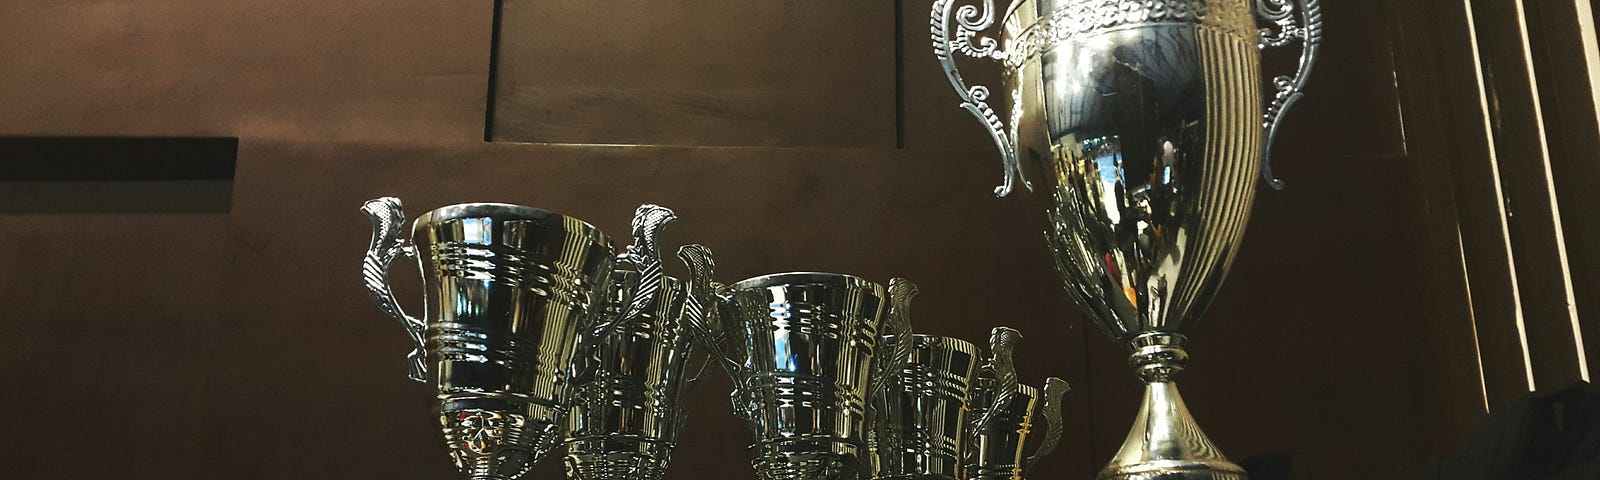 Photo of a group of trophies sitting on a shelf.